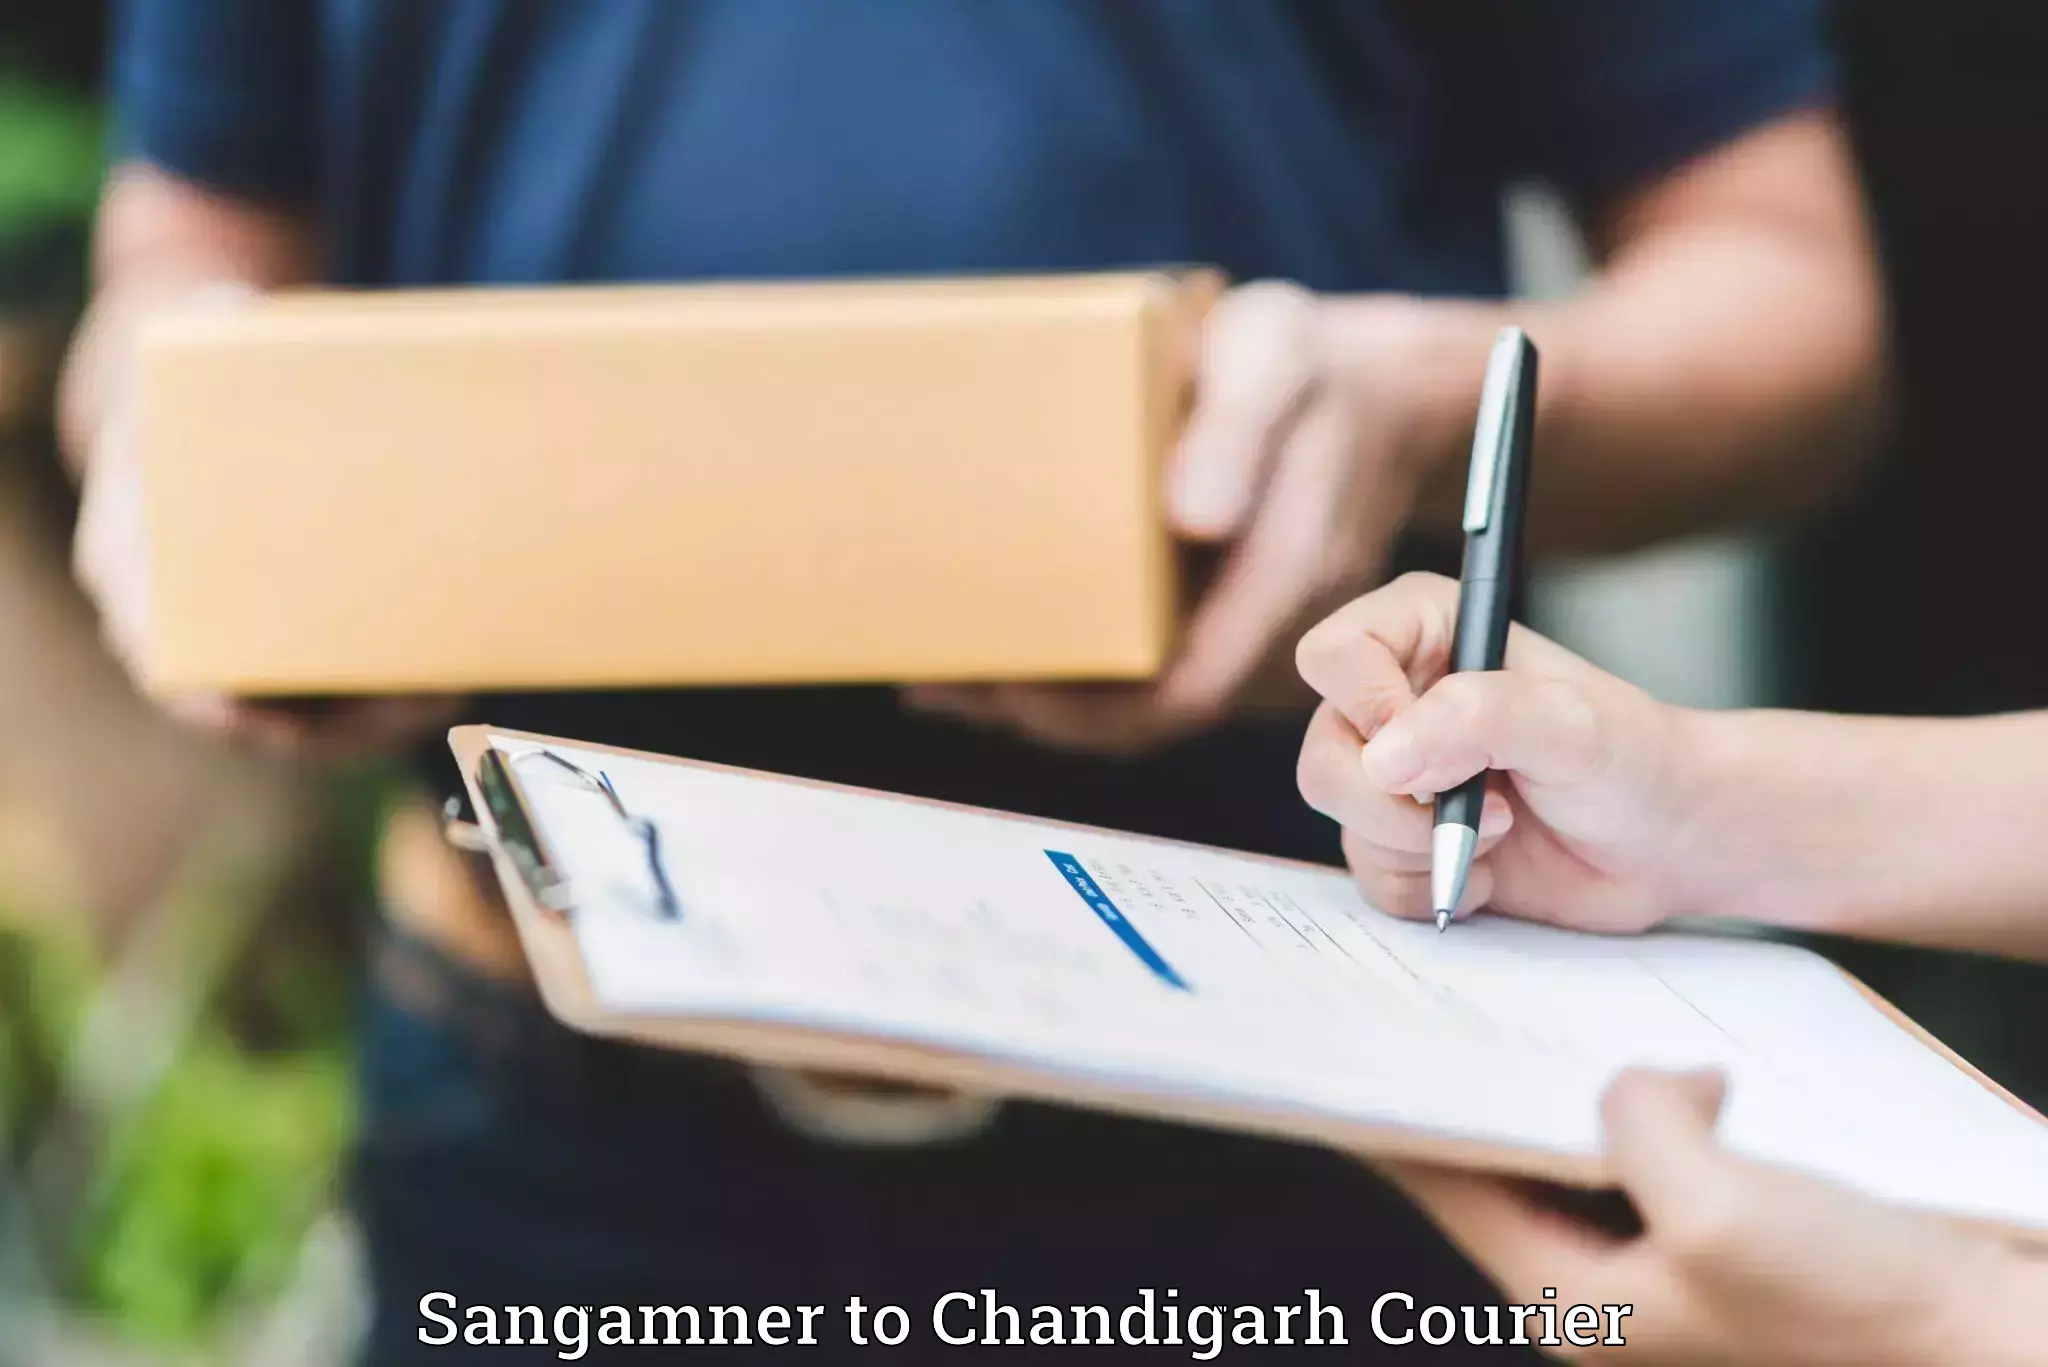 Luggage delivery app Sangamner to Chandigarh